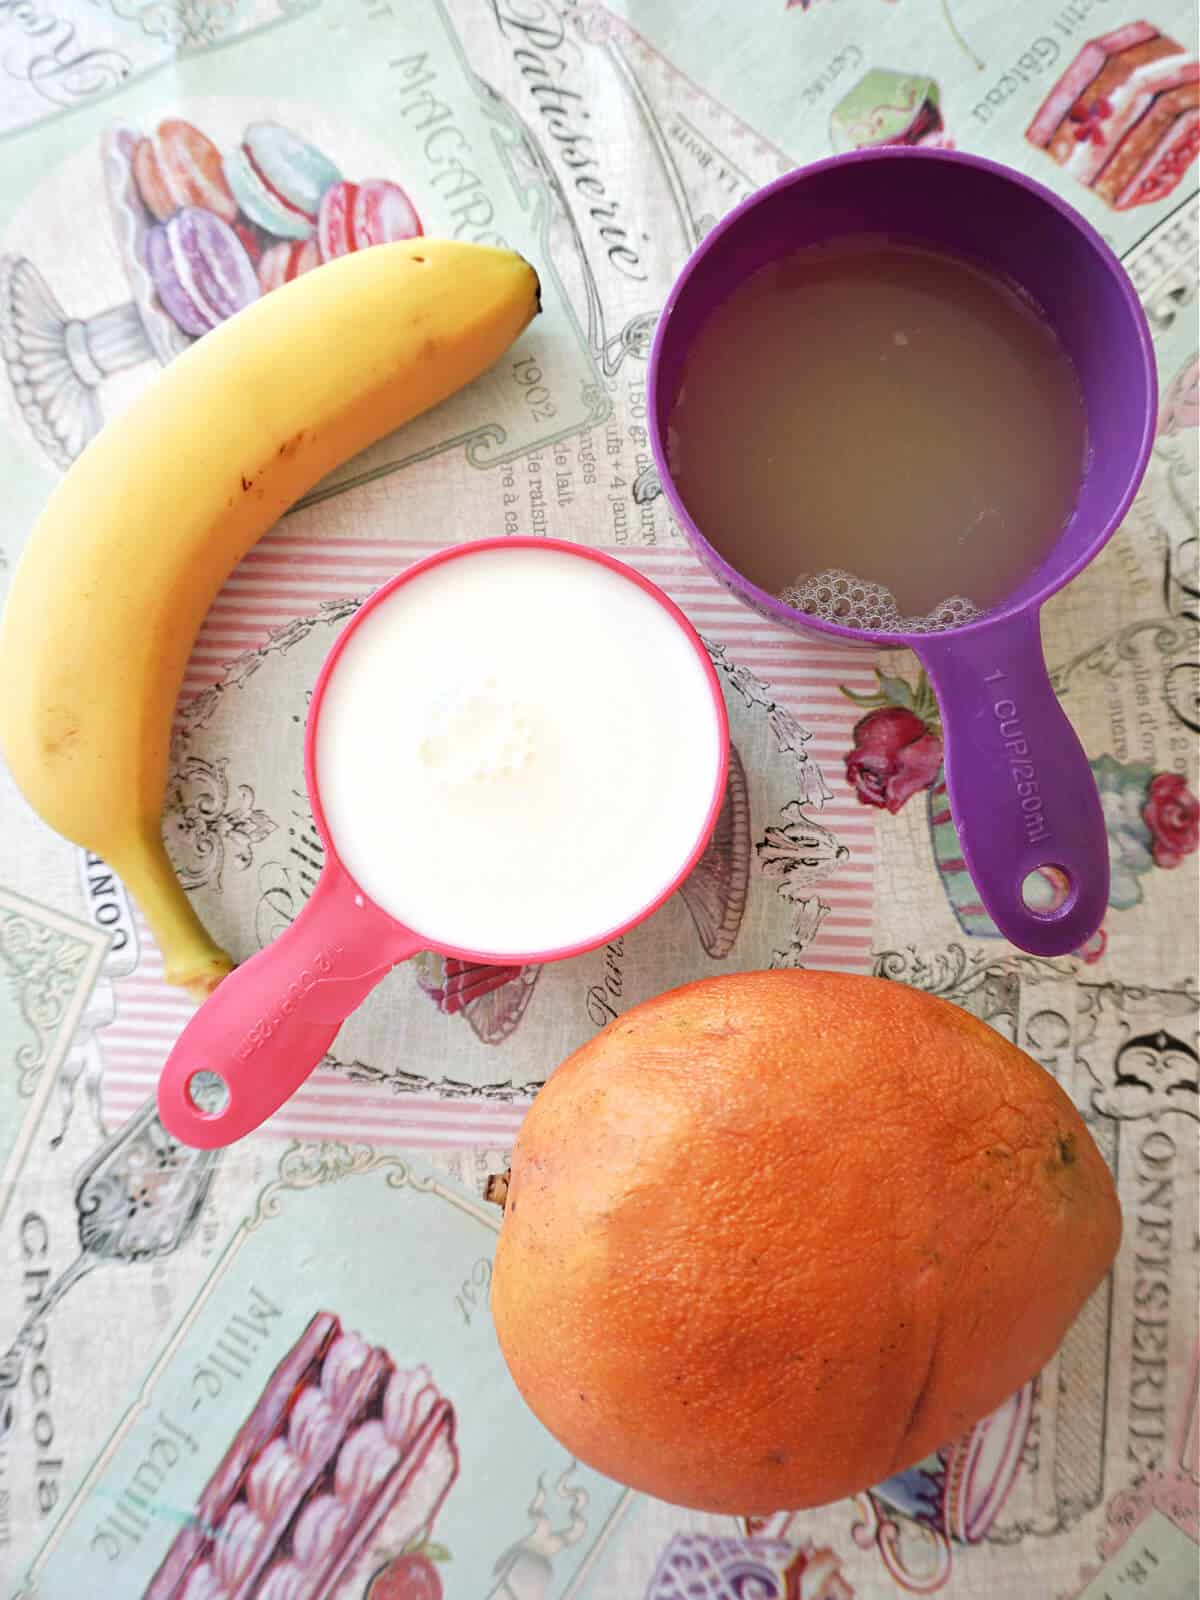 Overhead shoot of 1 mango, 1 banana, a cup of milk and a cup of juice.